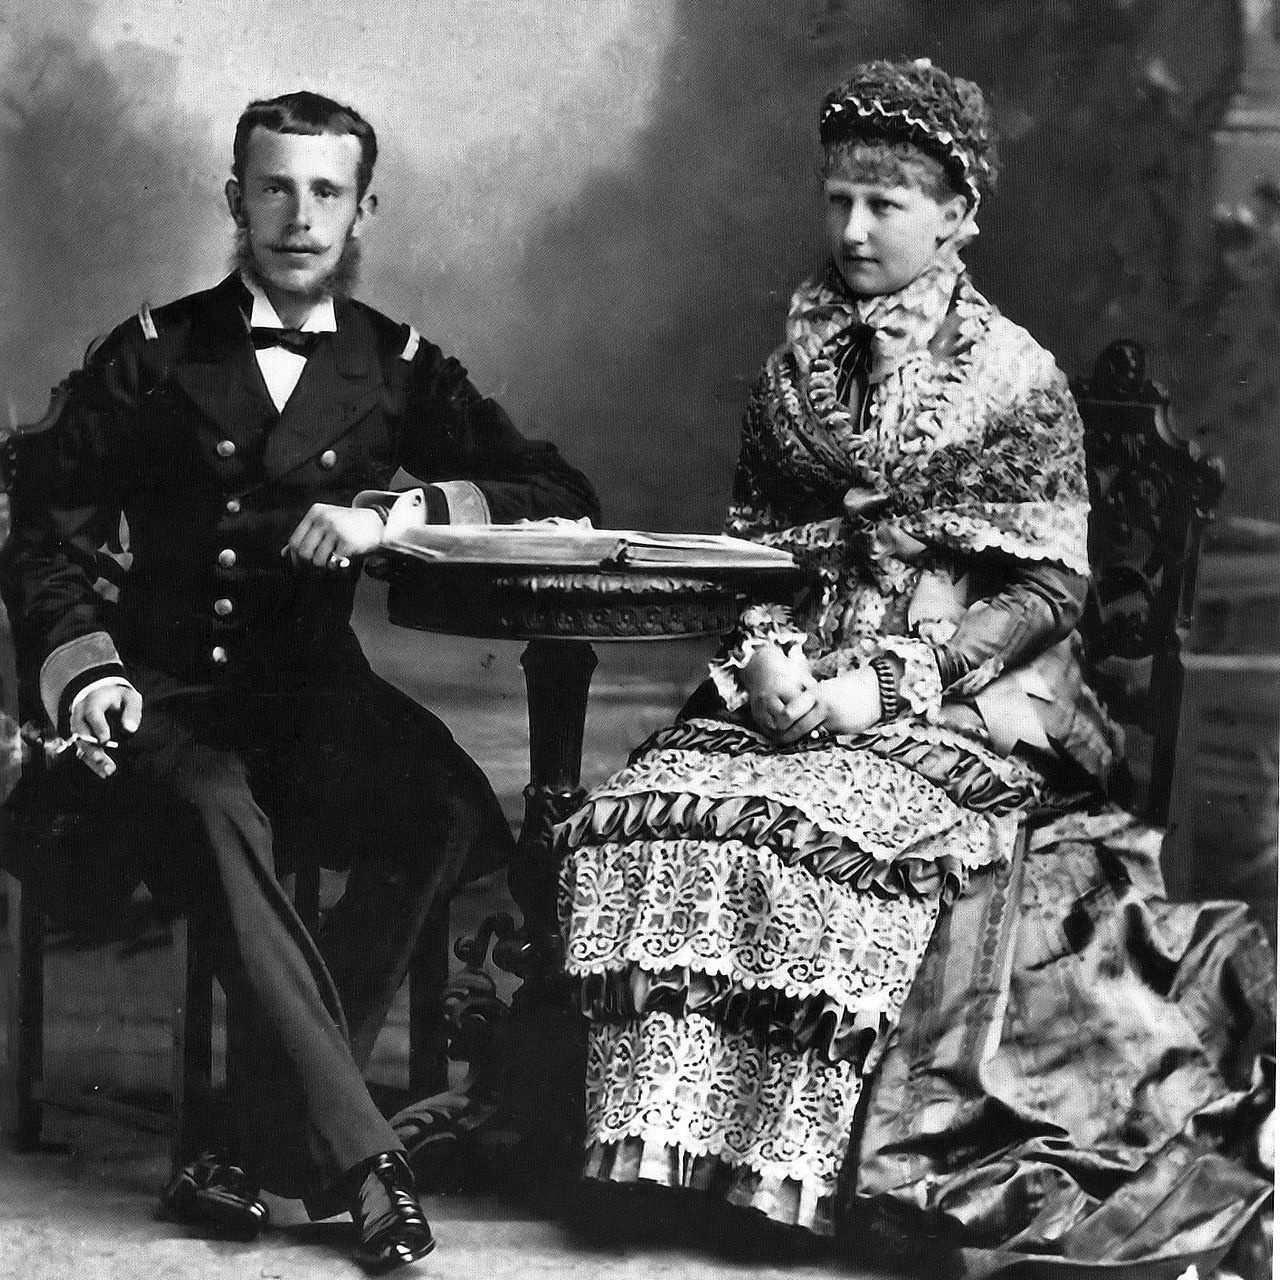 The Daughters of King Leopold II: Marrying Crowns.

Leopold II, second king of the Belgians, was known for bringing in money for his country, but at the expense of the Congo's resources, ivory and rubber, and people. In the end, his policies of forced labor killed millions of Congolese.

Altogether, he had four legitimate children. His three daughters married well; the eldest, Louise Prince Philipp of Saxe-Coburg and Gotha, Stéphanie's hand was taken by Crown Prince Rudolf of Austria, and the youngest, Clémentine, married into the Bonaparte family against her father's wishes.

Leopold's only son died at the age of 10.

Pictured here is daughter Stéphanie with Rudolf, who later committed an apparent murder-suicide with his mistress, Mary Vetsera.